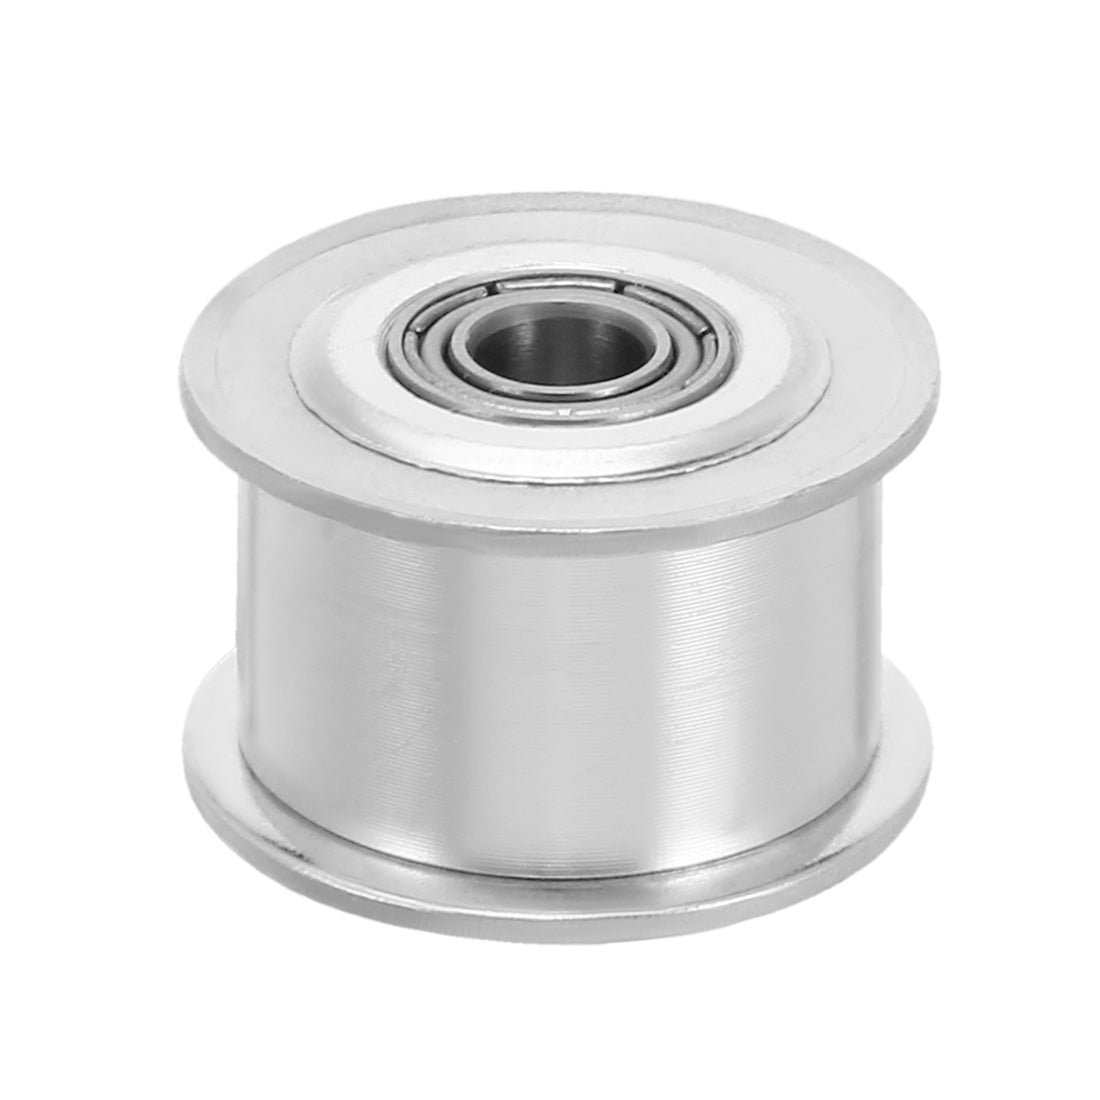 uxcell Uxcell Aluminum 3 M 20T 6mm Bore Toothless Timing Idler Belt Pulley Flange Synchronous Wheel for 10mm Timing Belt